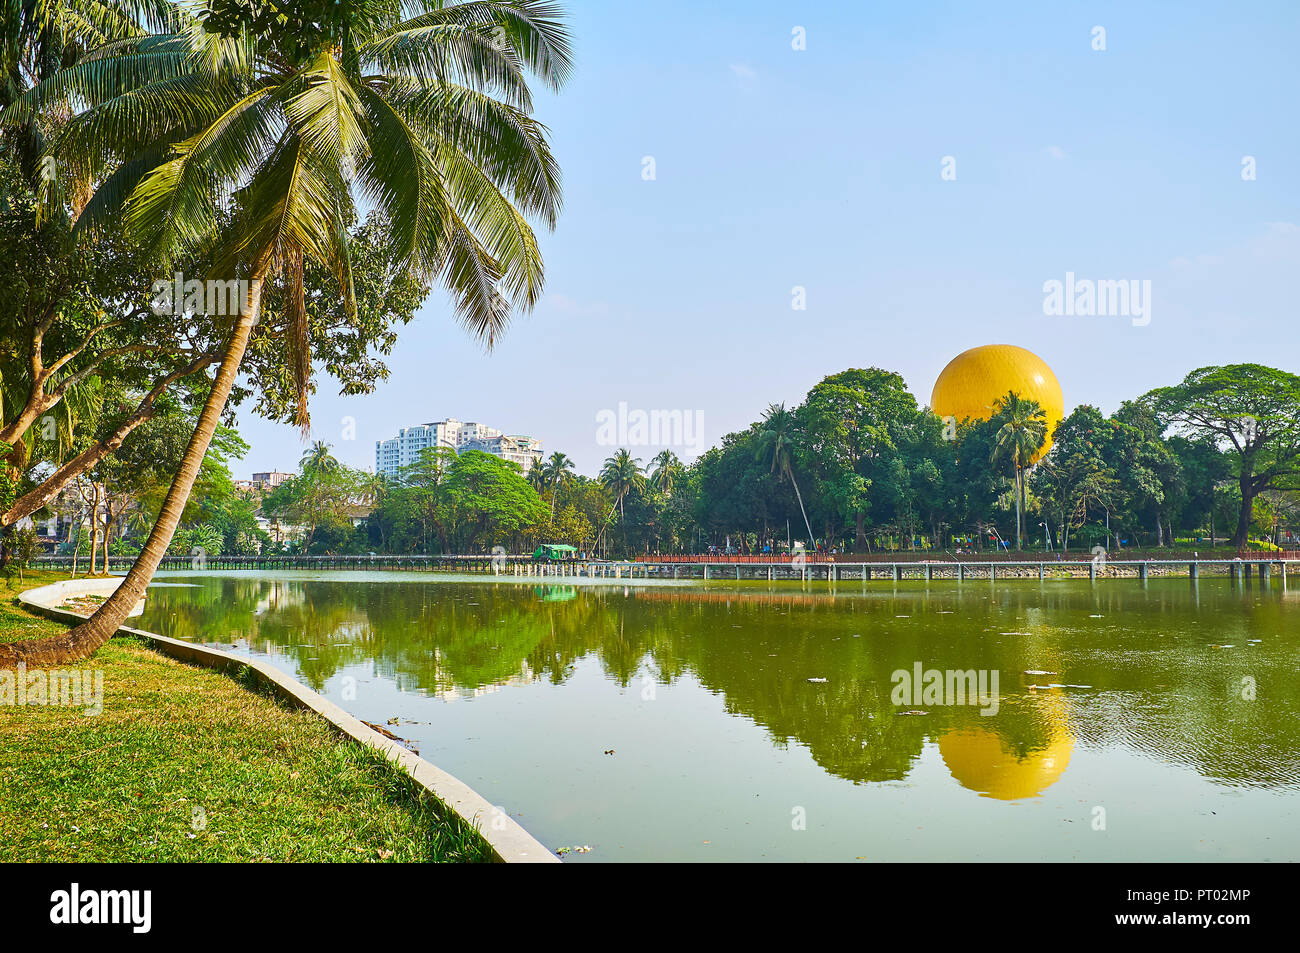 Lush tropic garden with palm trees and other local species covers the banks of Kandawgyi Lake, one of the major lakes in Yangon, Myanmar. Stock Photo